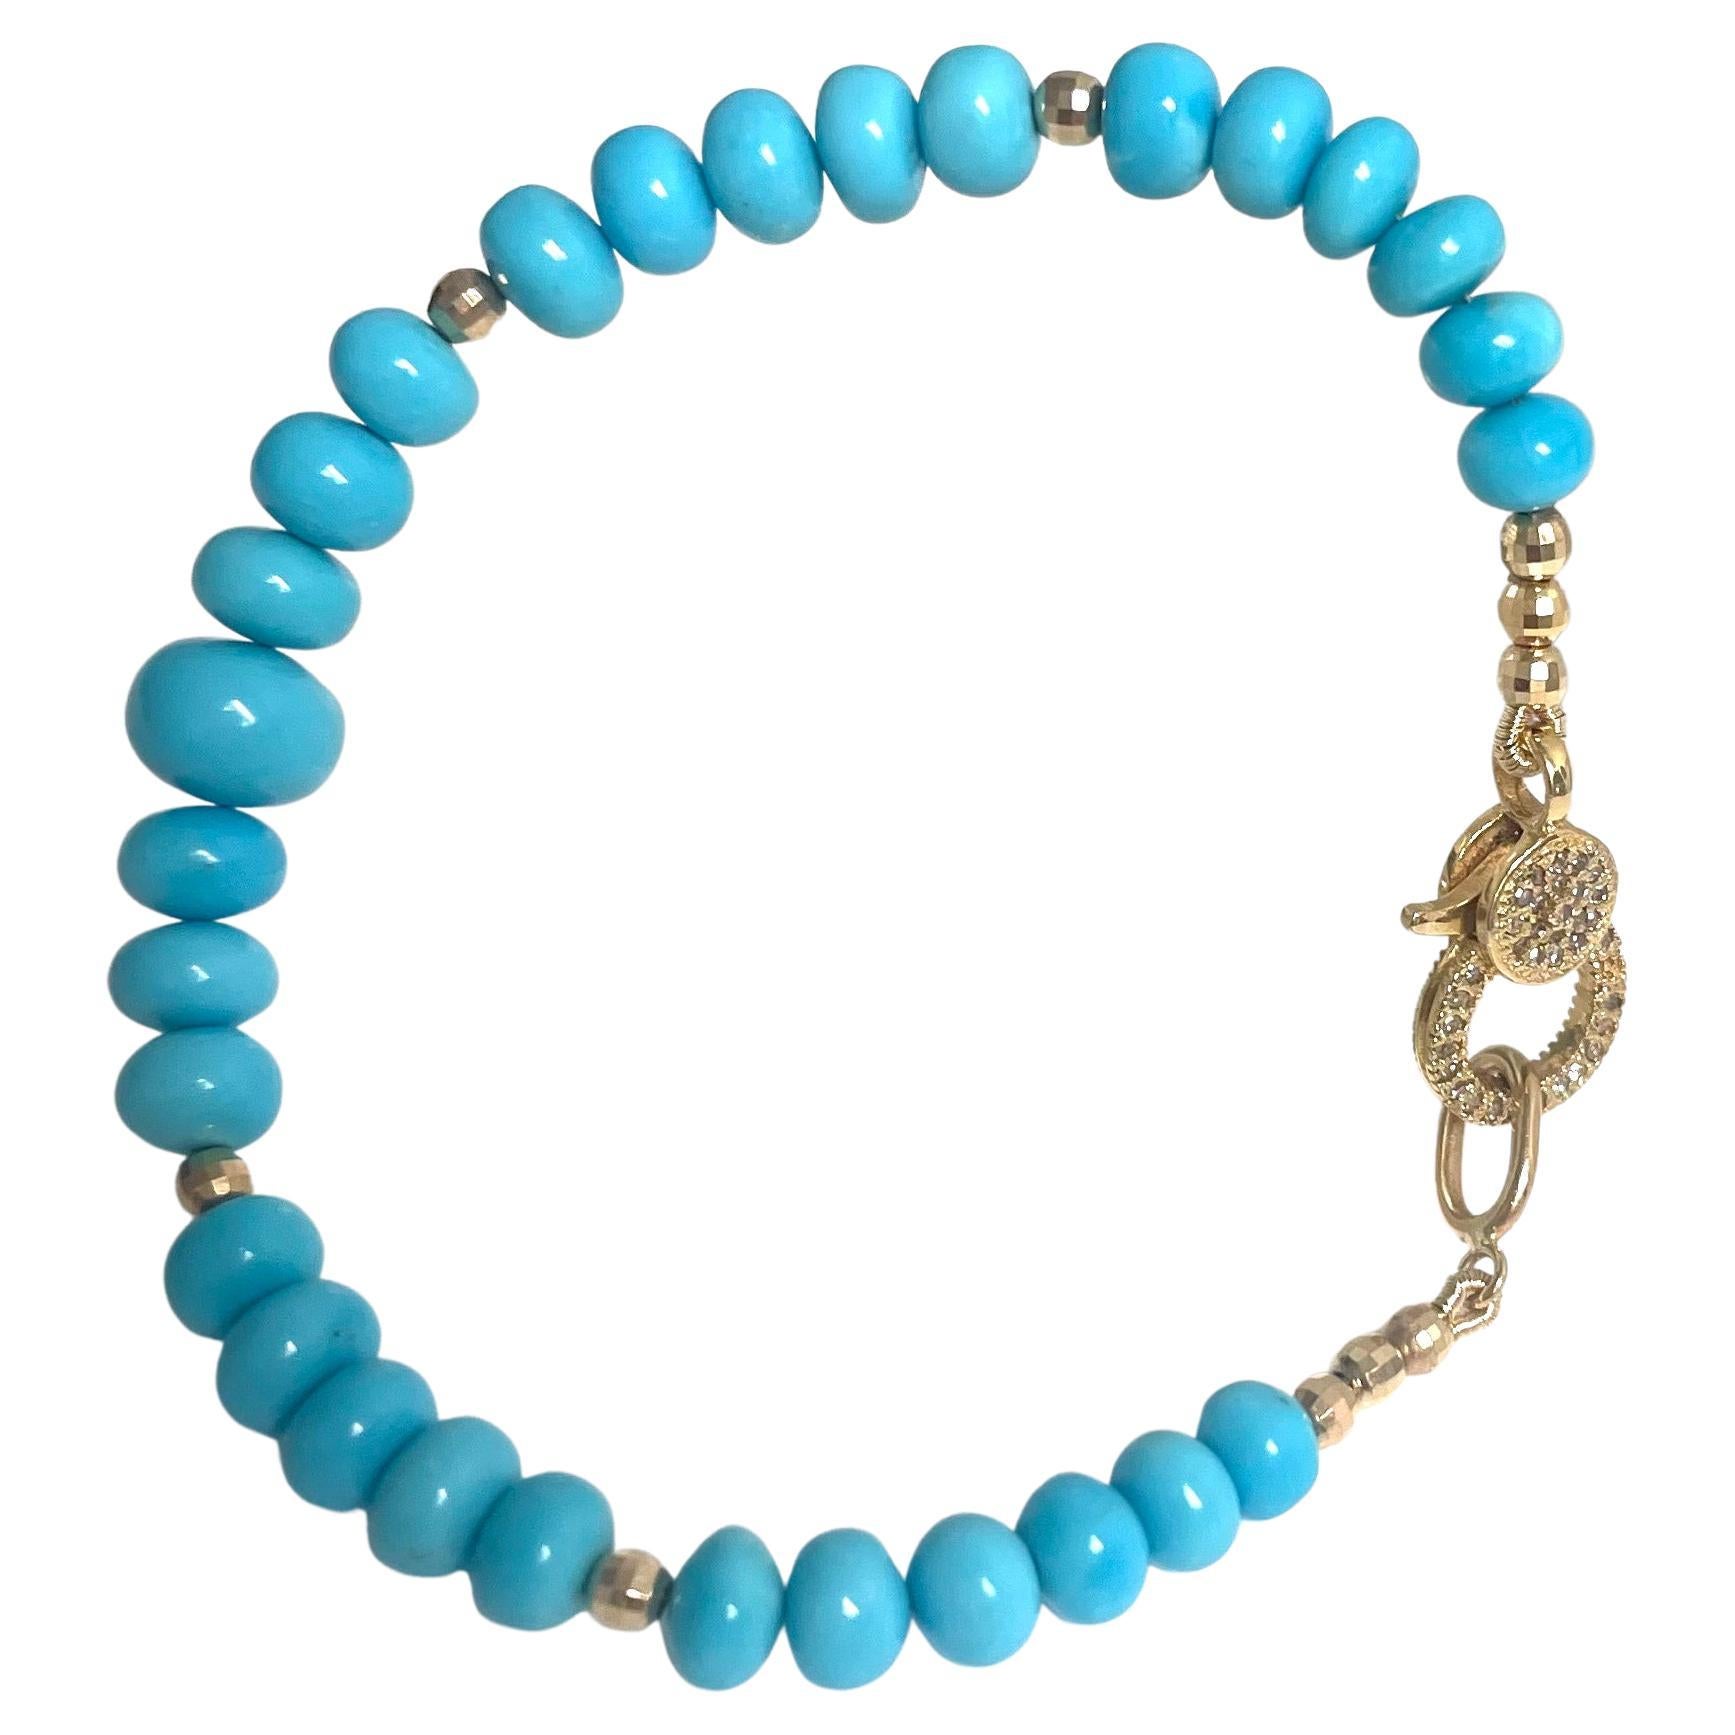 Sleeping Beauty Turquoise with Pave Diamonds Bracelet For Sale 4